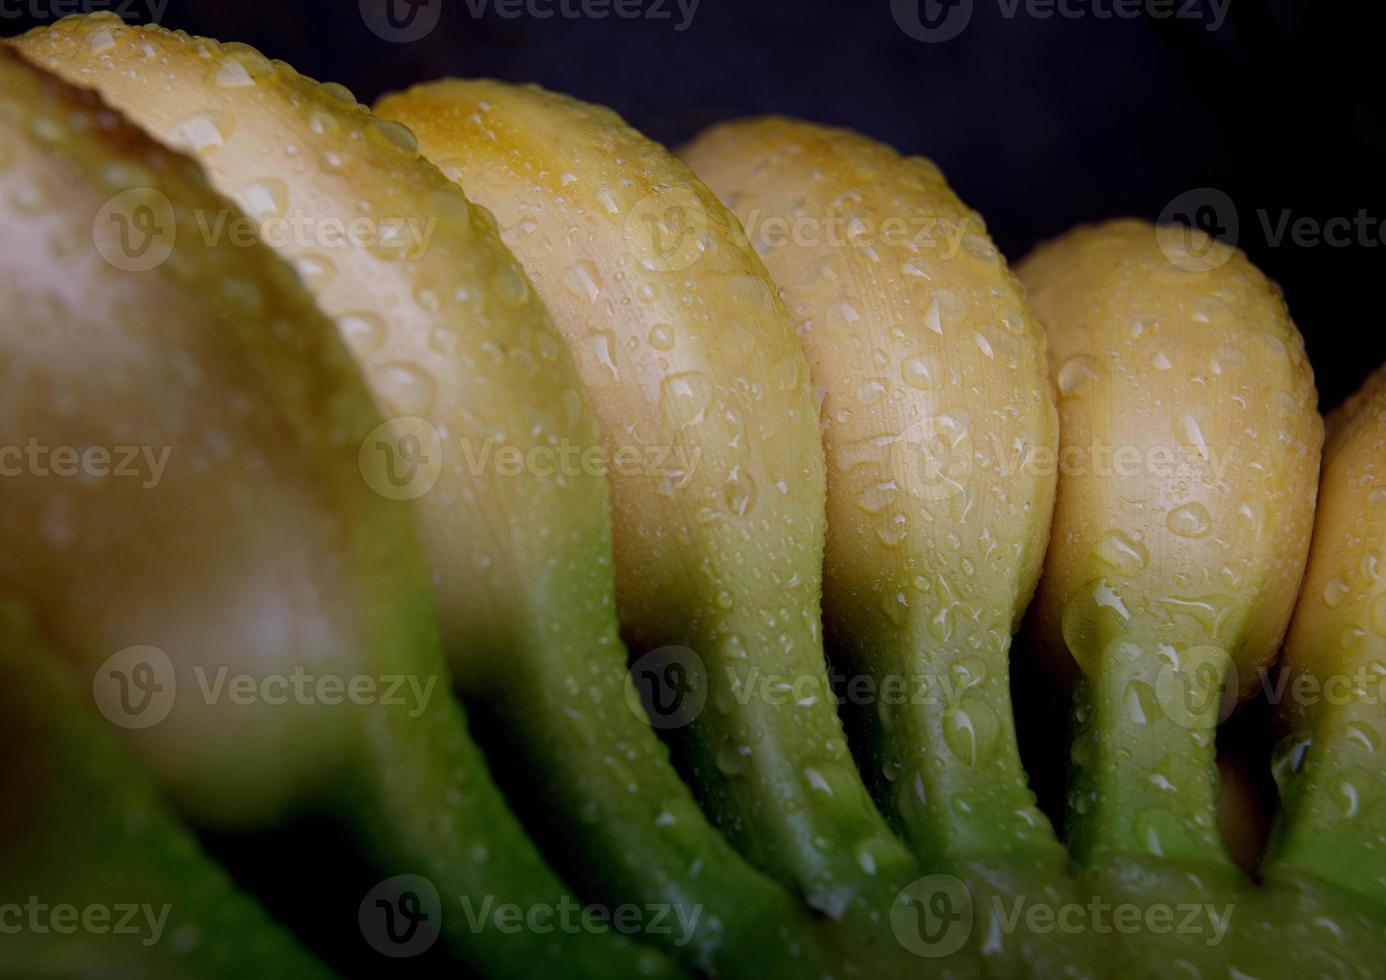 Bunch of bananas with drops of water on the peel. photo